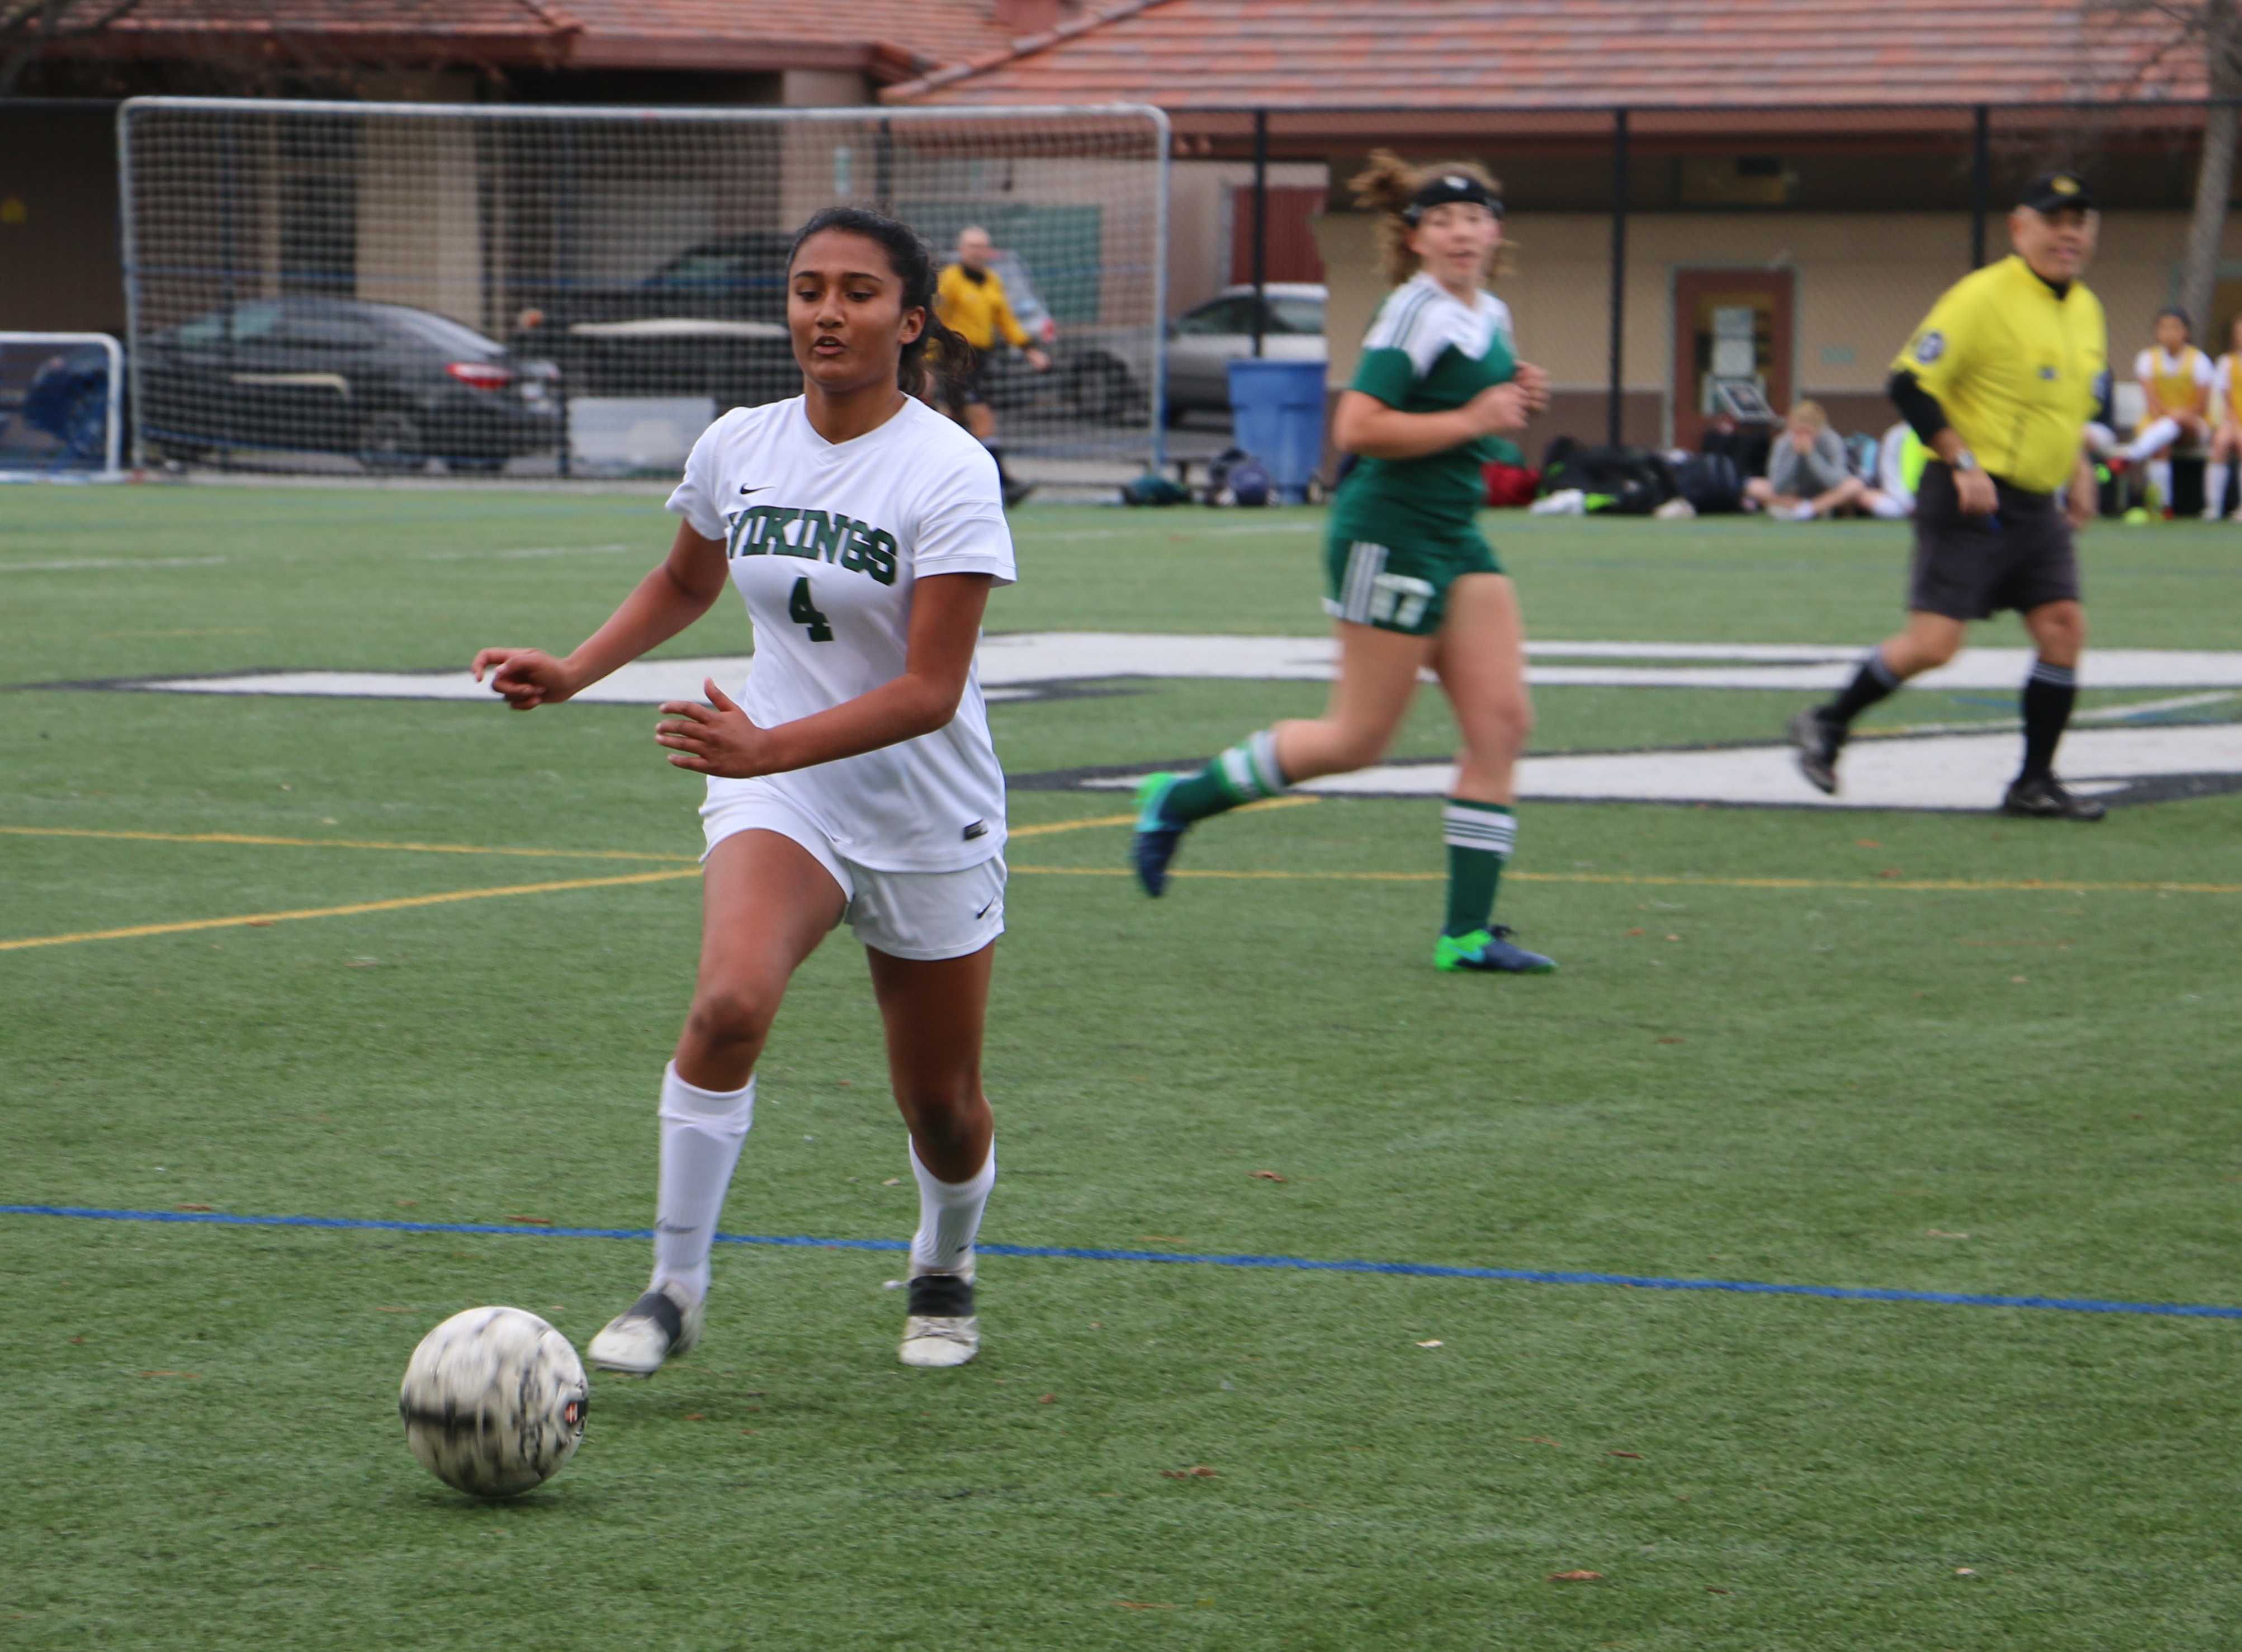 Sophomore Leena Srinivasan passes the ball in the second half. Srinivasan was dominant in the midfield tracking down loose balls and blocking the passing lanes. Photo by Ethan Kao.